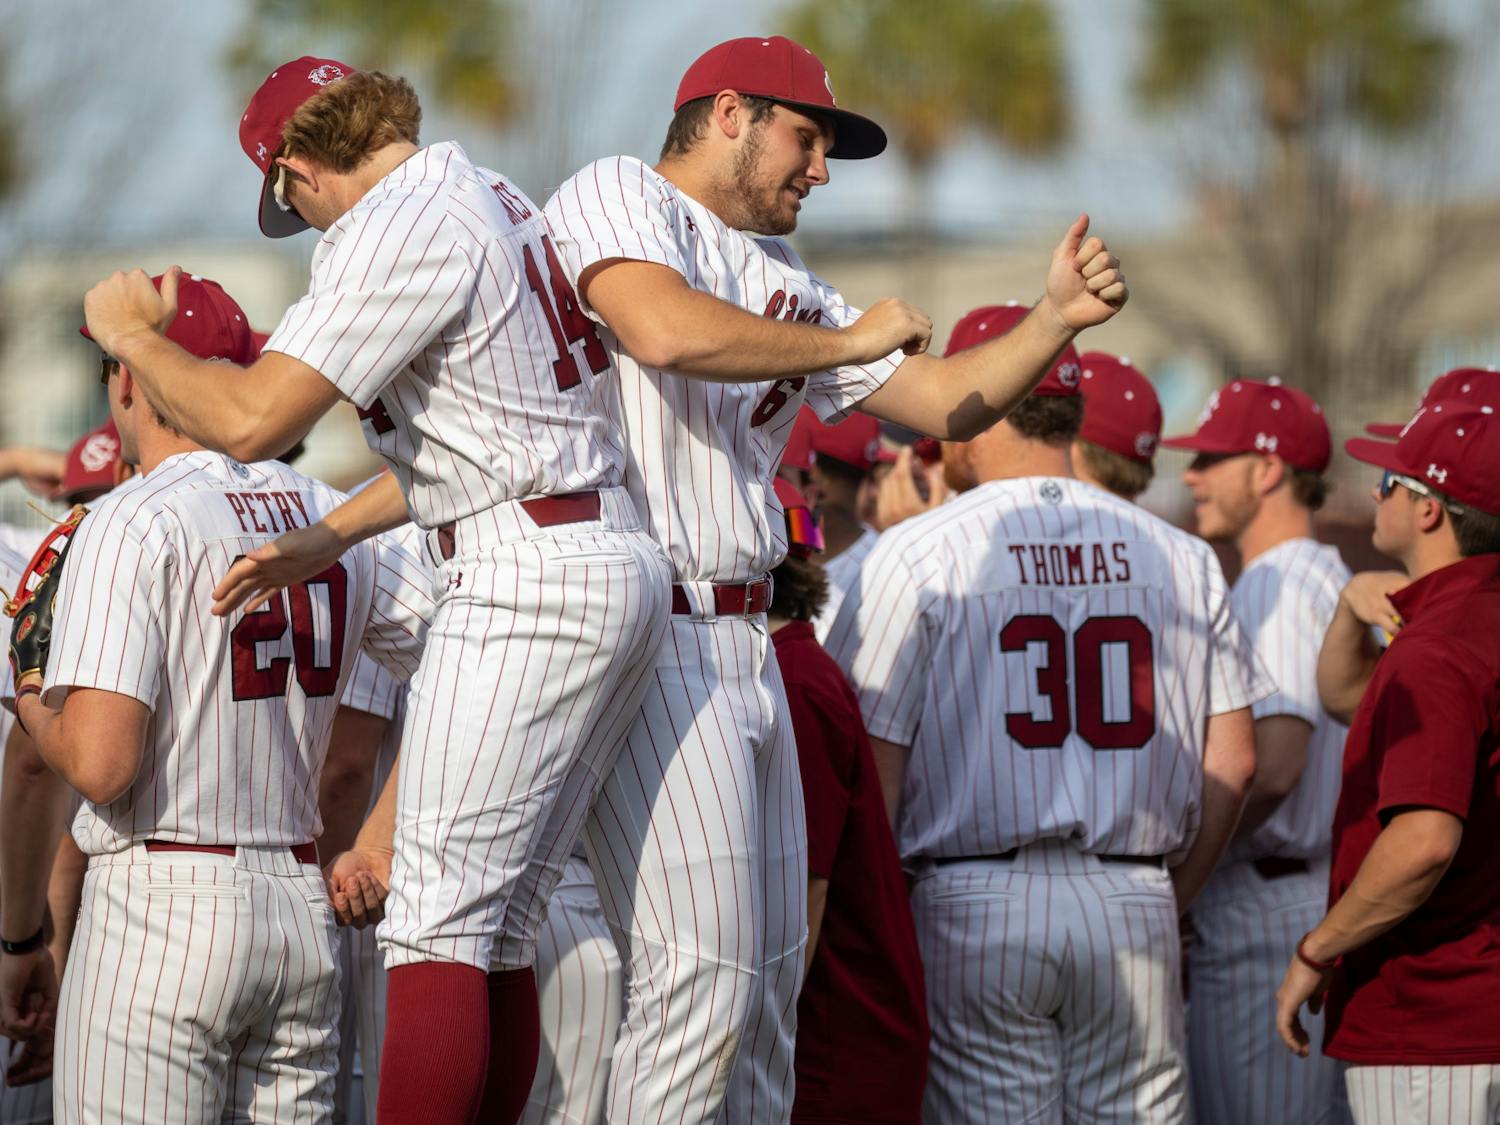 The University of South Carolina upheld a winning streak against the University of Pennsylvania during a three-game series starting on Feb. 24, 2023, at Founders Park. The No. 23 Gamecocks started the weekend strong and never looked back, finishing 7-4 on Friday, 1-0 on Saturday and 6-5 on Sunday.